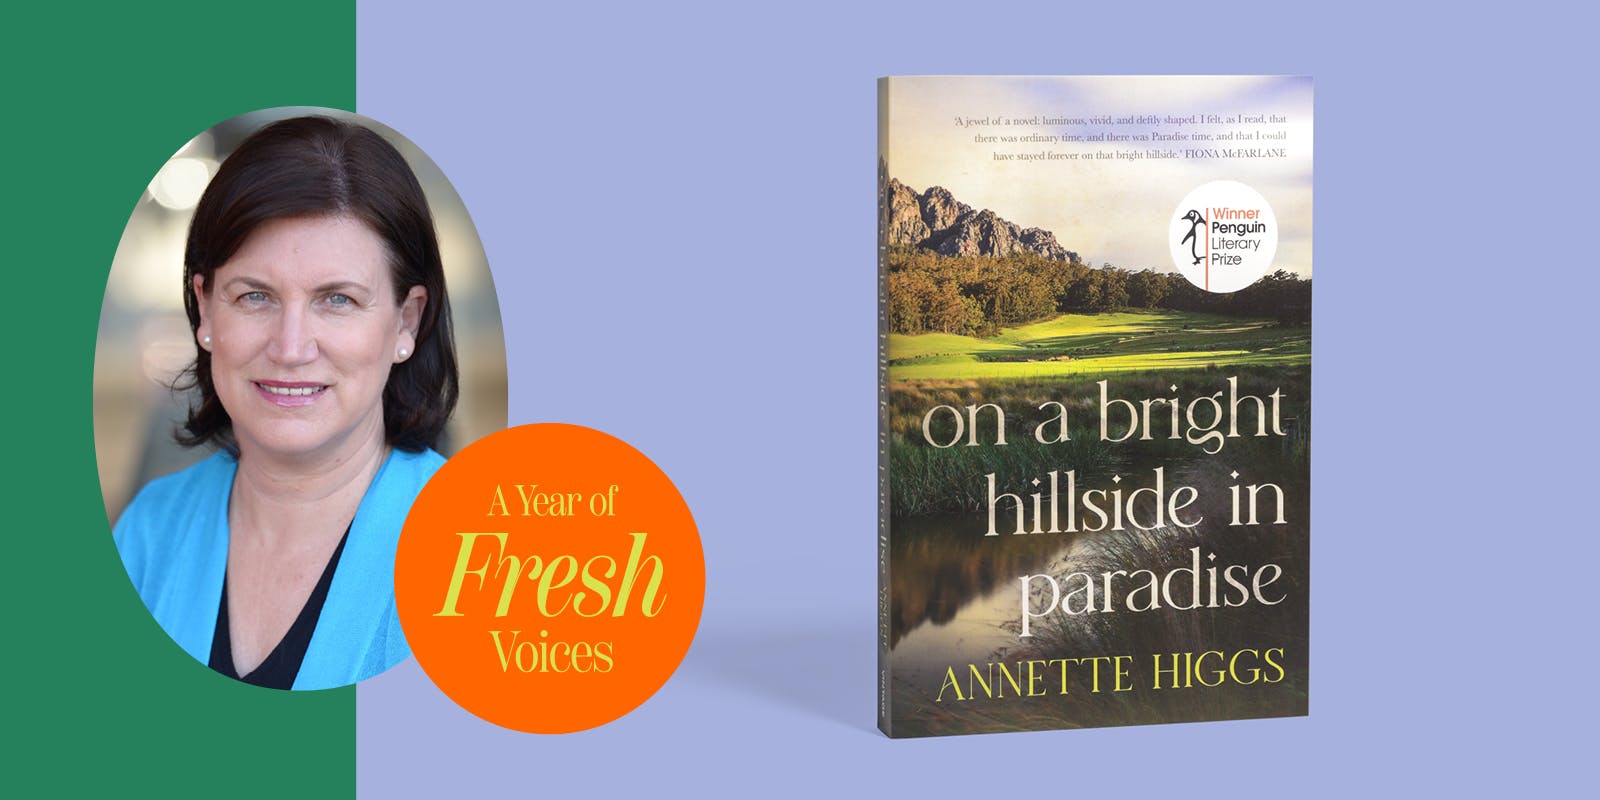 How a Doctorate of Arts led Annette Higgs to her debut novel